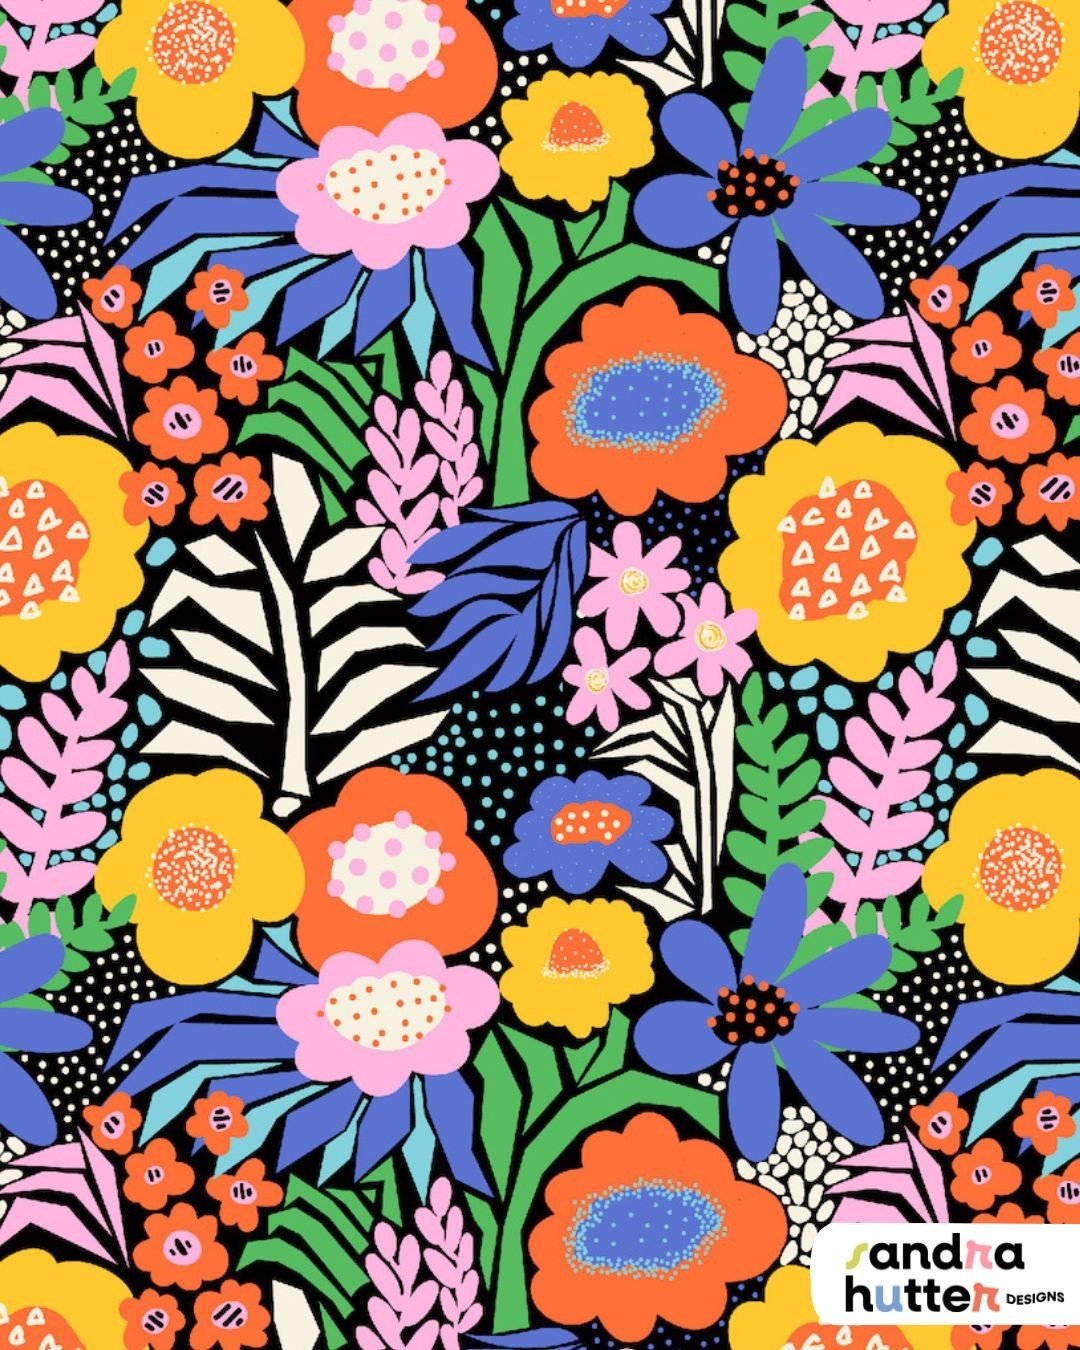 Sending summer vibes your way with this colorful, bold floral collage print! ☀️🌺 I hope the weather is sunnier where you are than it is here. 🌧️ ⁠
It's up for grabs @spoonflower on a wide range of fabric options, wallpaper, and home decor to suit y